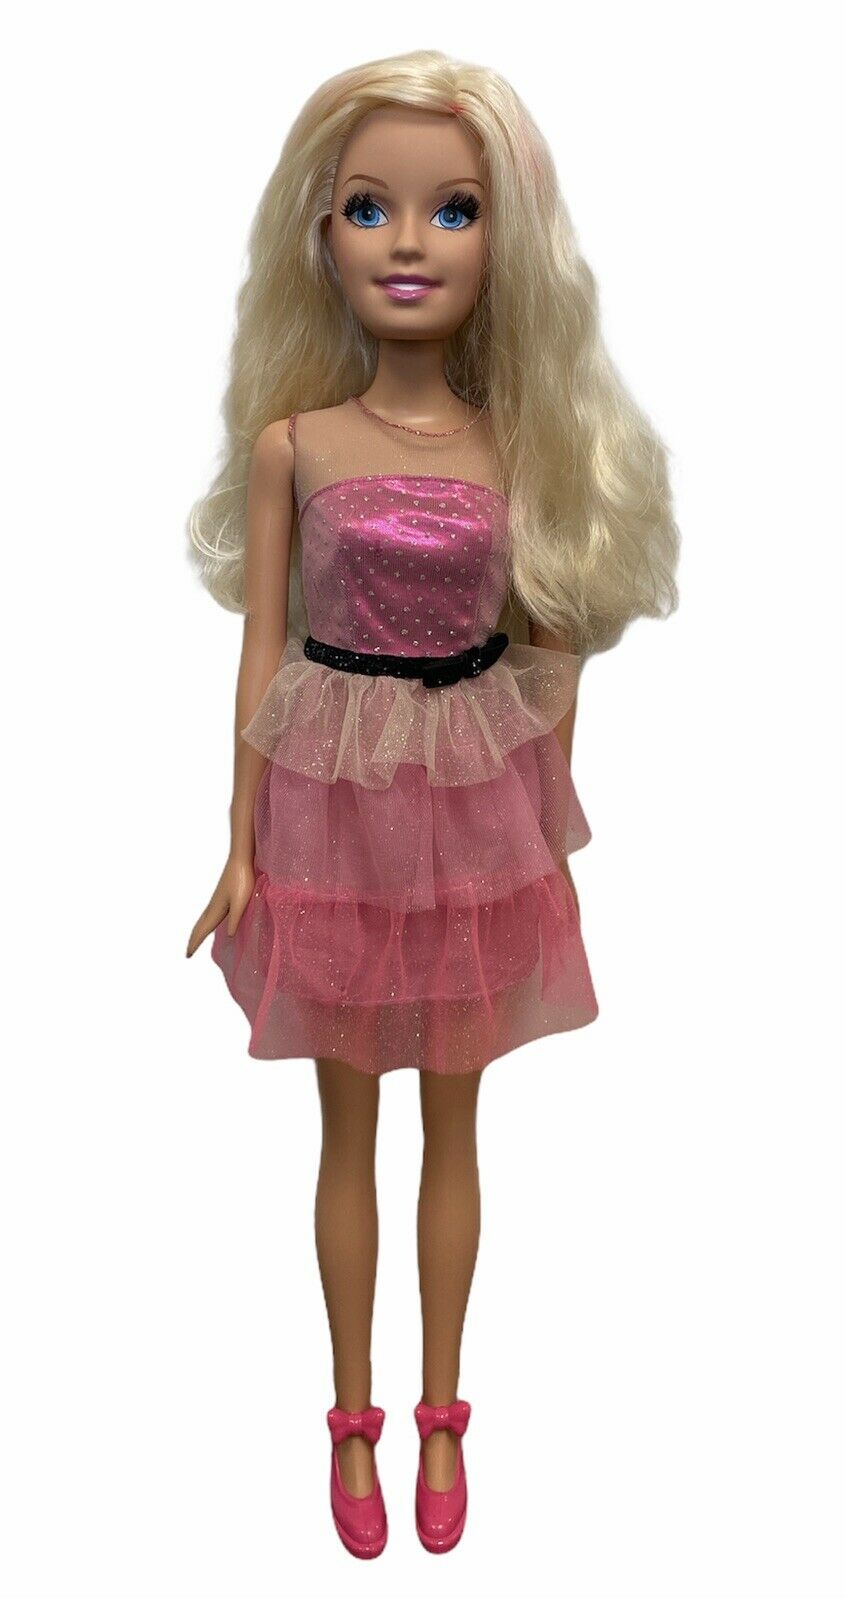 Mattel Barbie Doll Blonde Just Play My Size 28 Inches With Dress